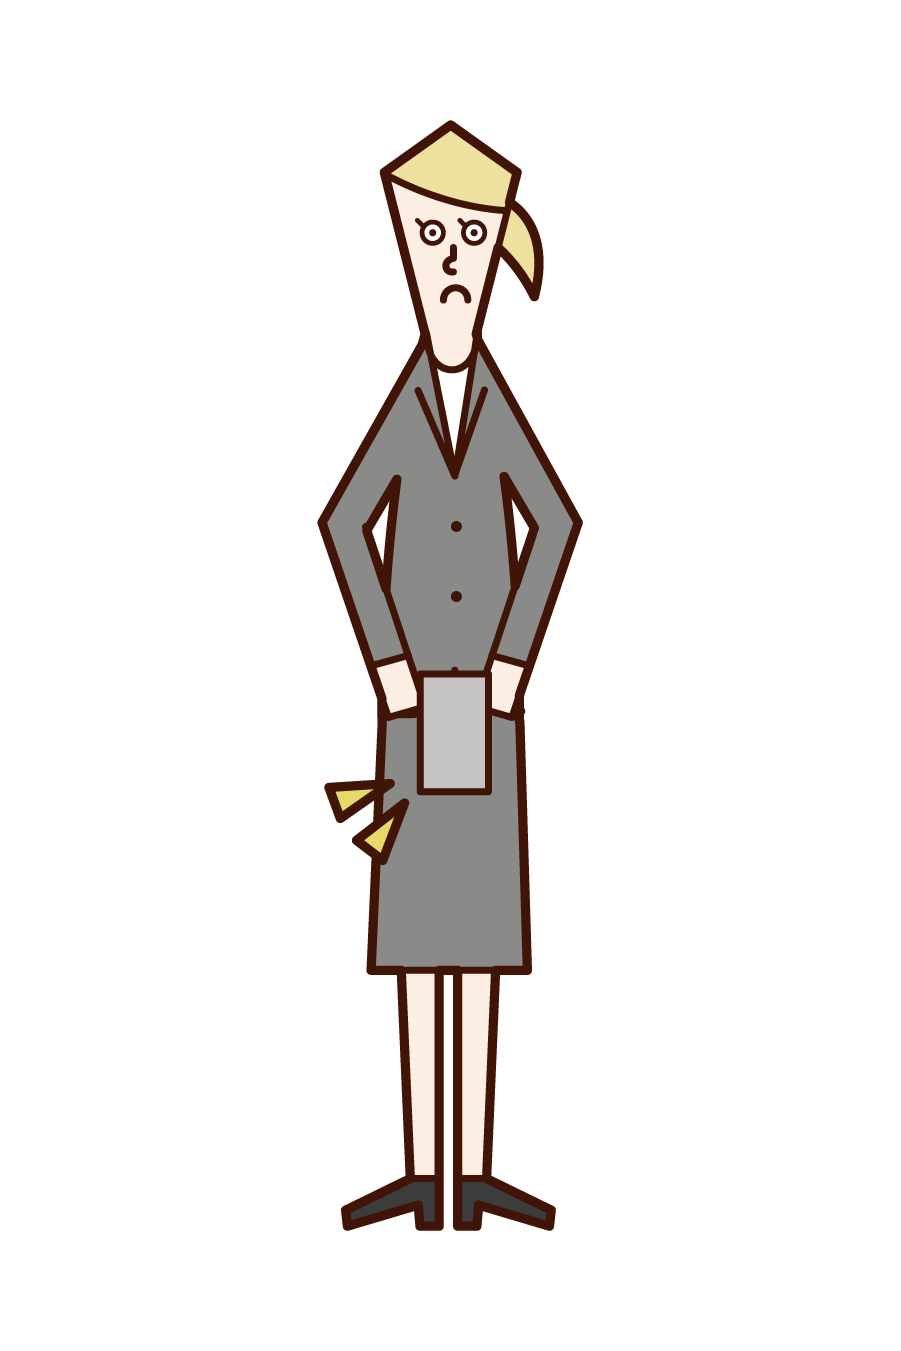 Illustration of the person (woman) who submits her resignation